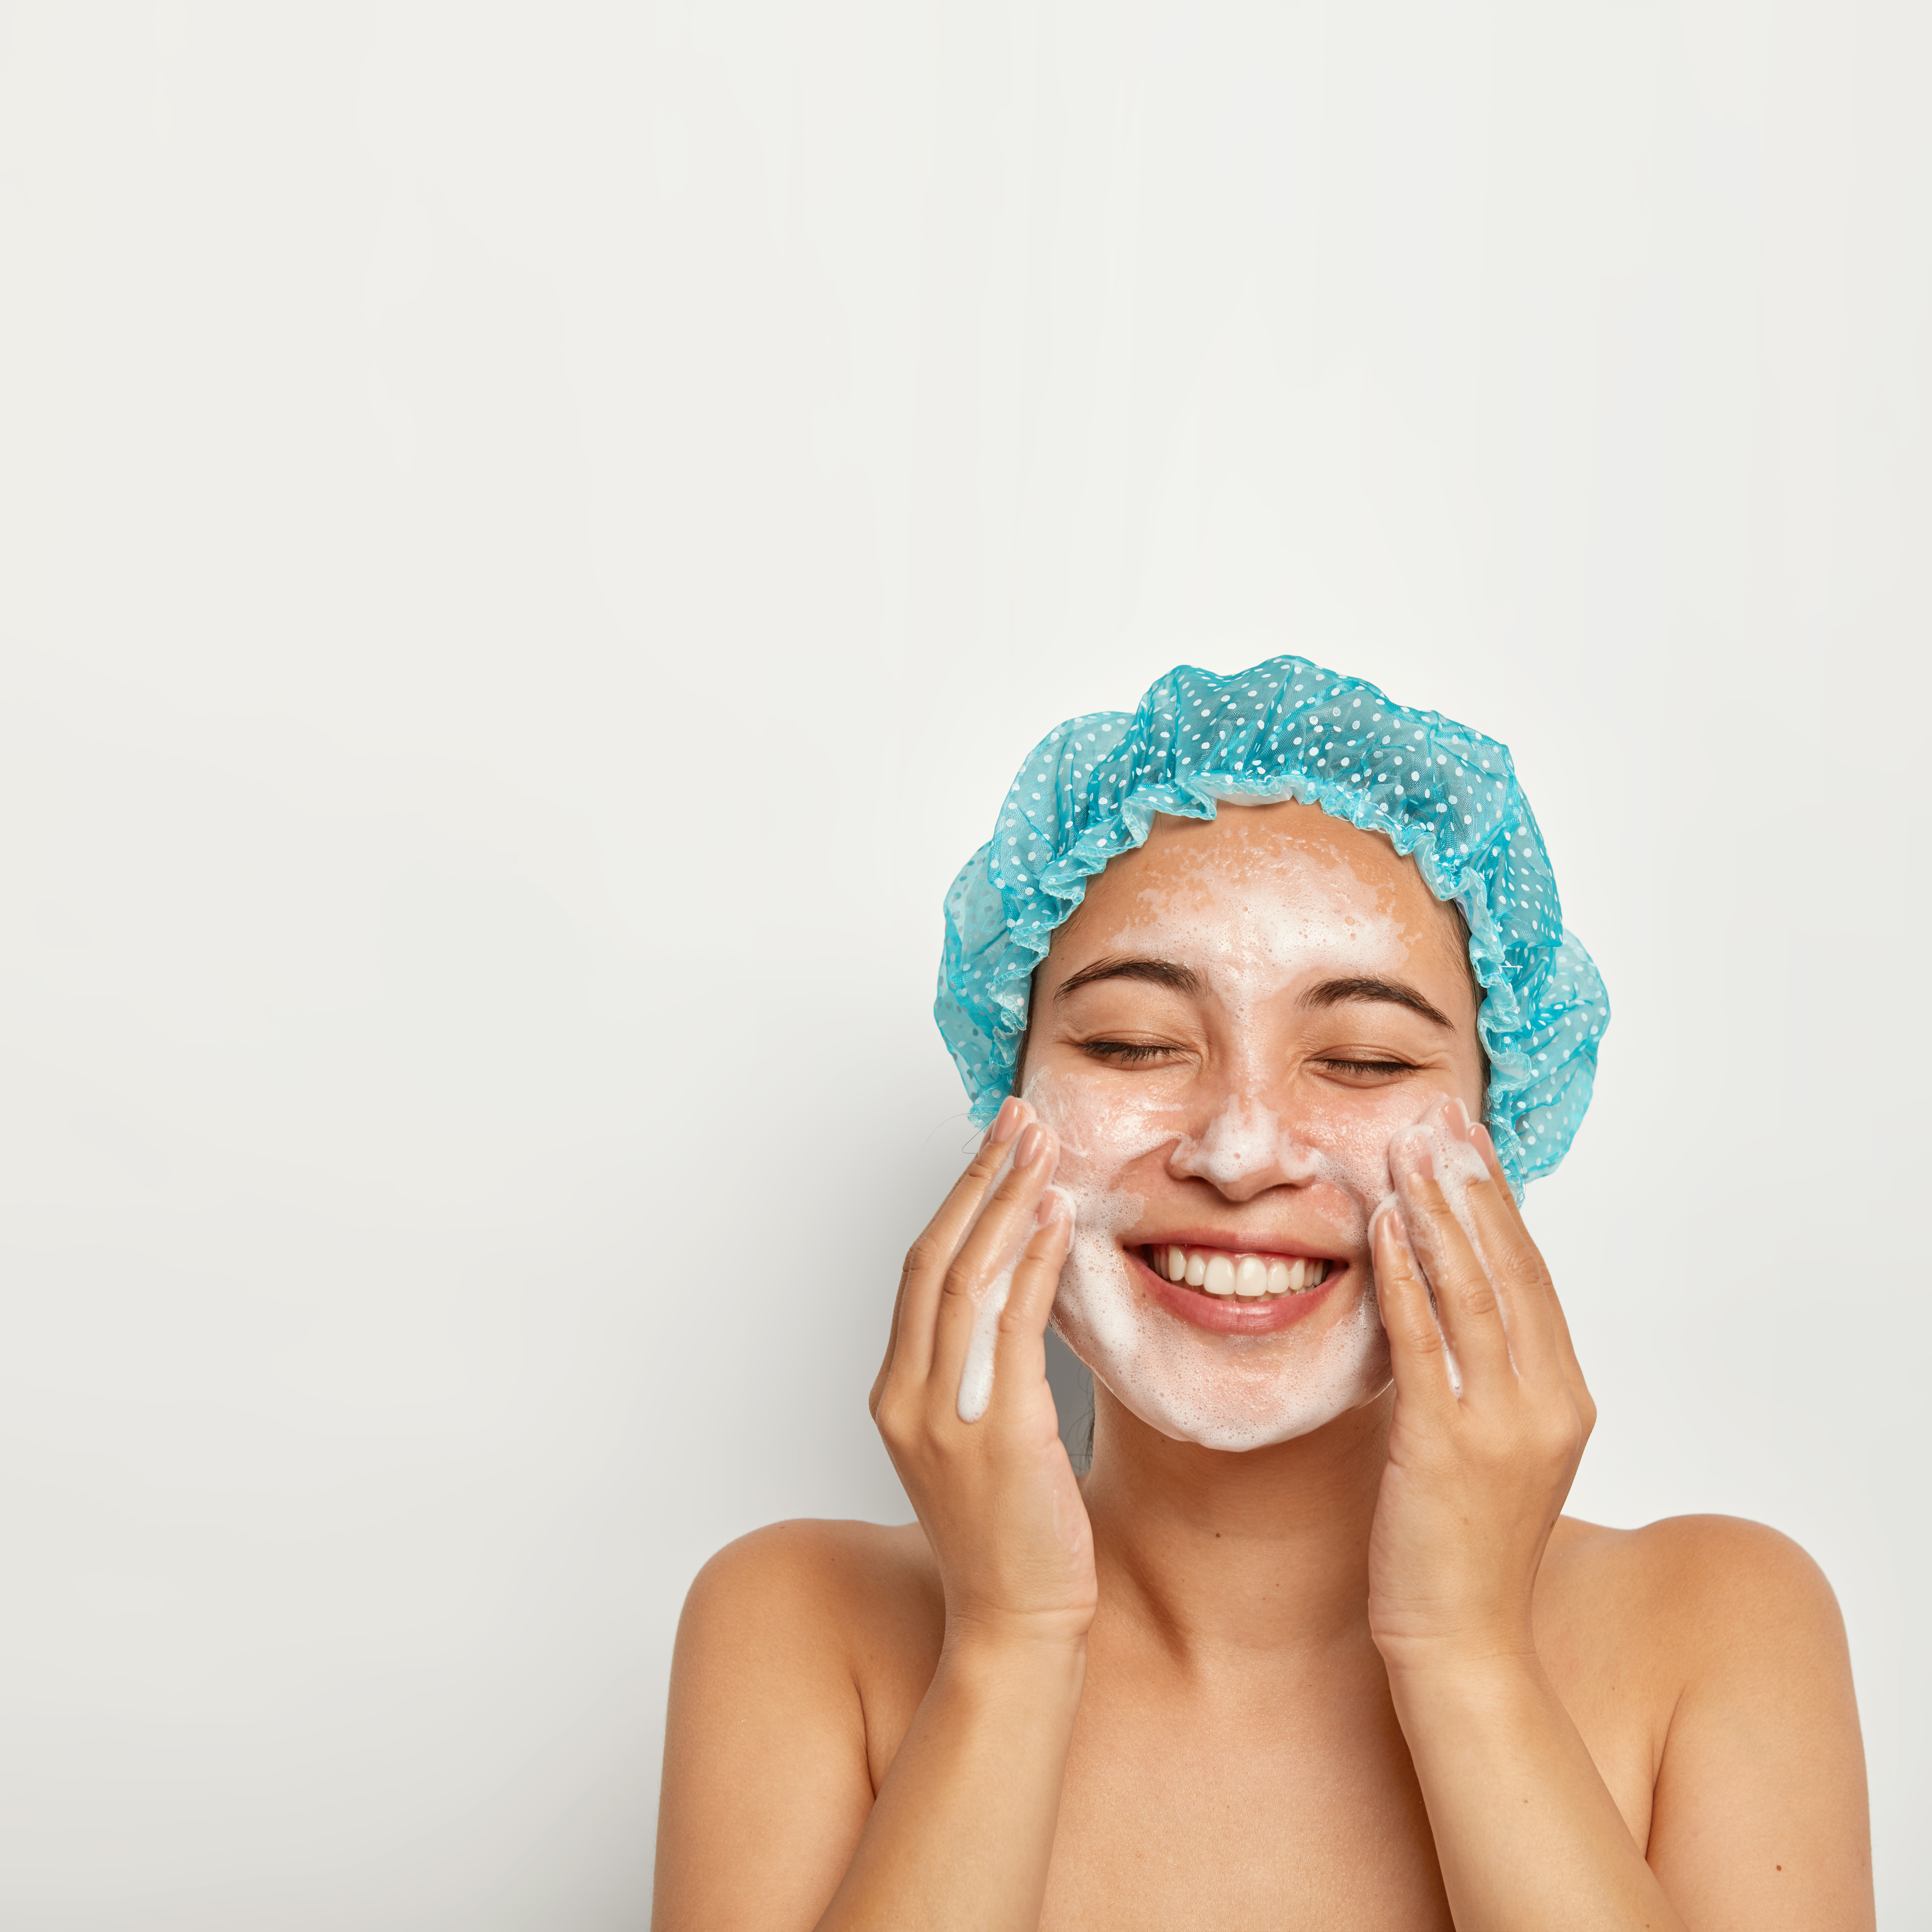 flawless-purity-skin-vertical-image-pretty-woman-washes-face-enjoys-cold-water-has-foam-skin-smiles-joyfully-keeps-eyes-closed-takes-care-personal-hygiene-wellness-concept.jpg